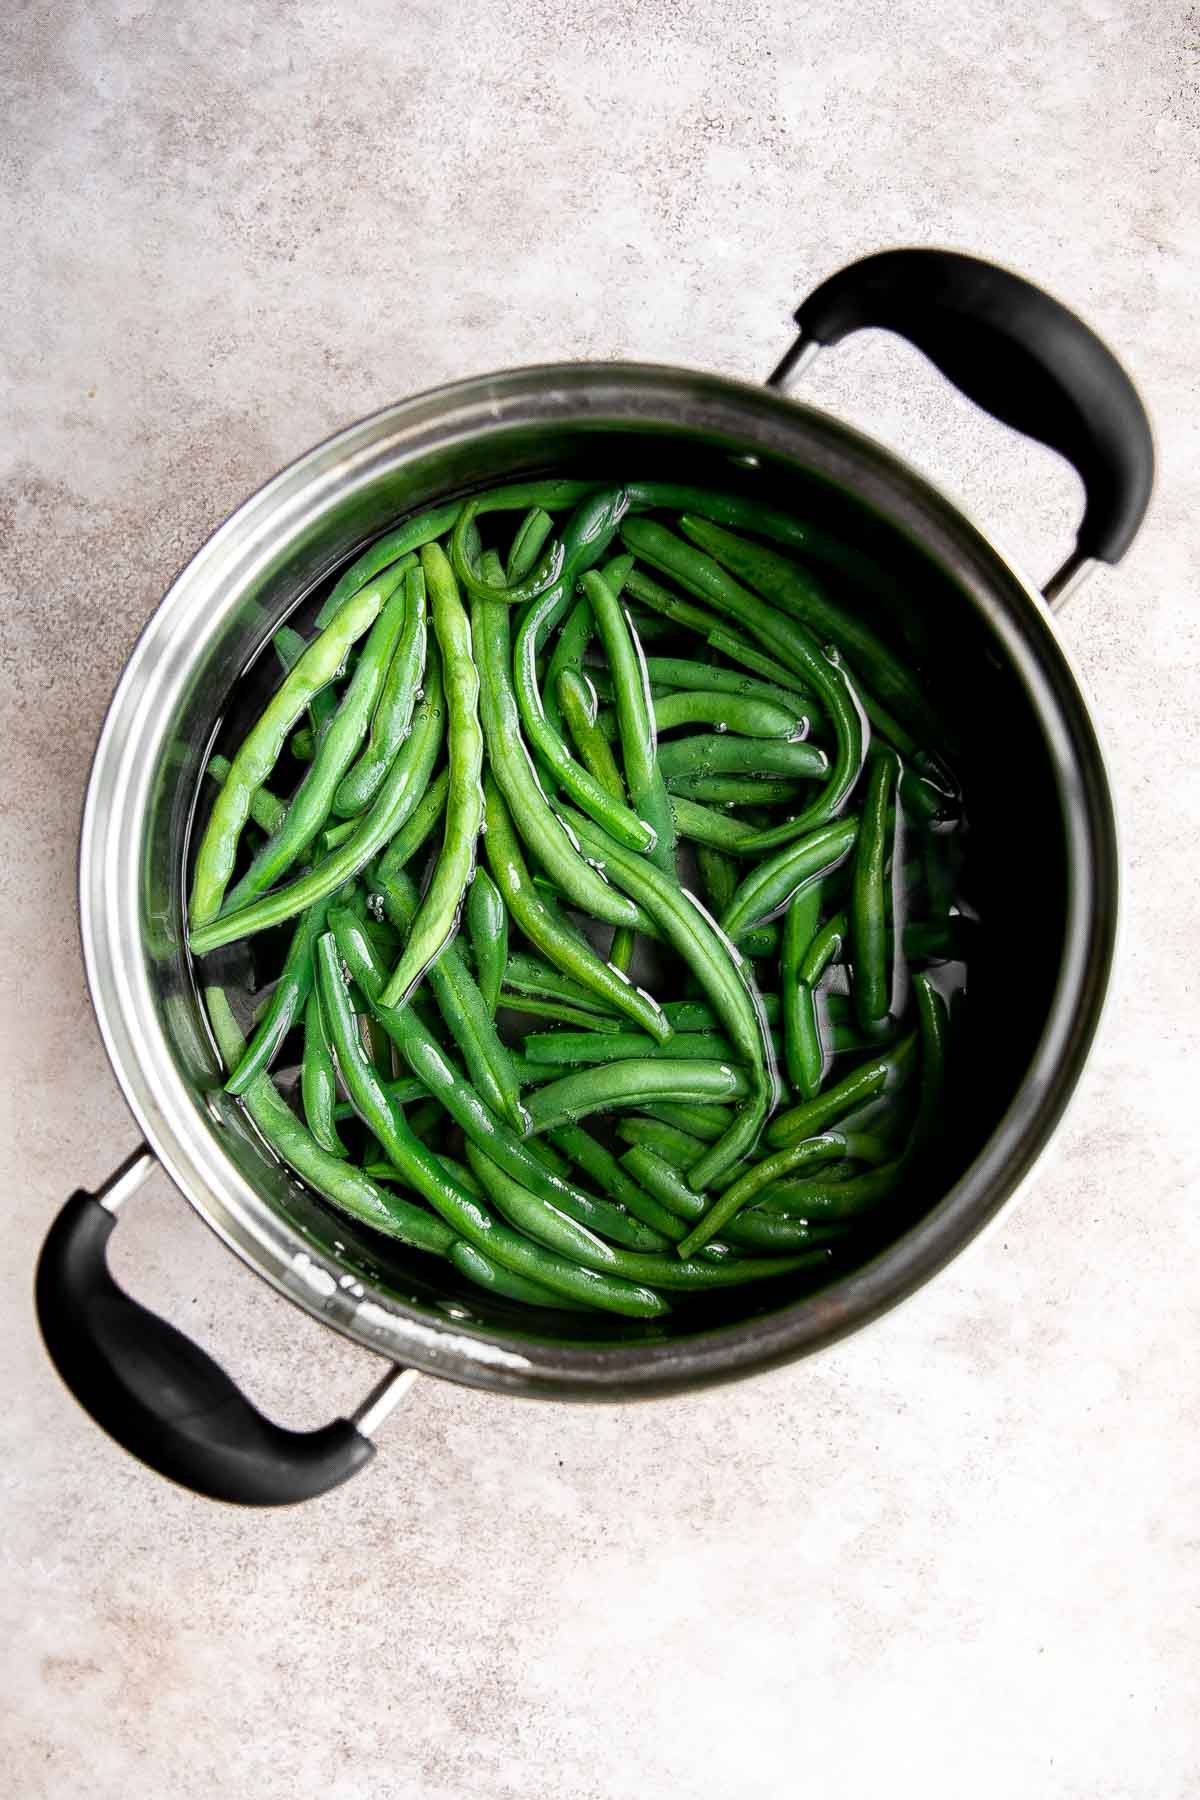 Green Beans Almondine is buttery, garlicky, and nutty. This classic French side dish is quick and easy to make, and loaded with flavor and texture. | aheadofthyme.com